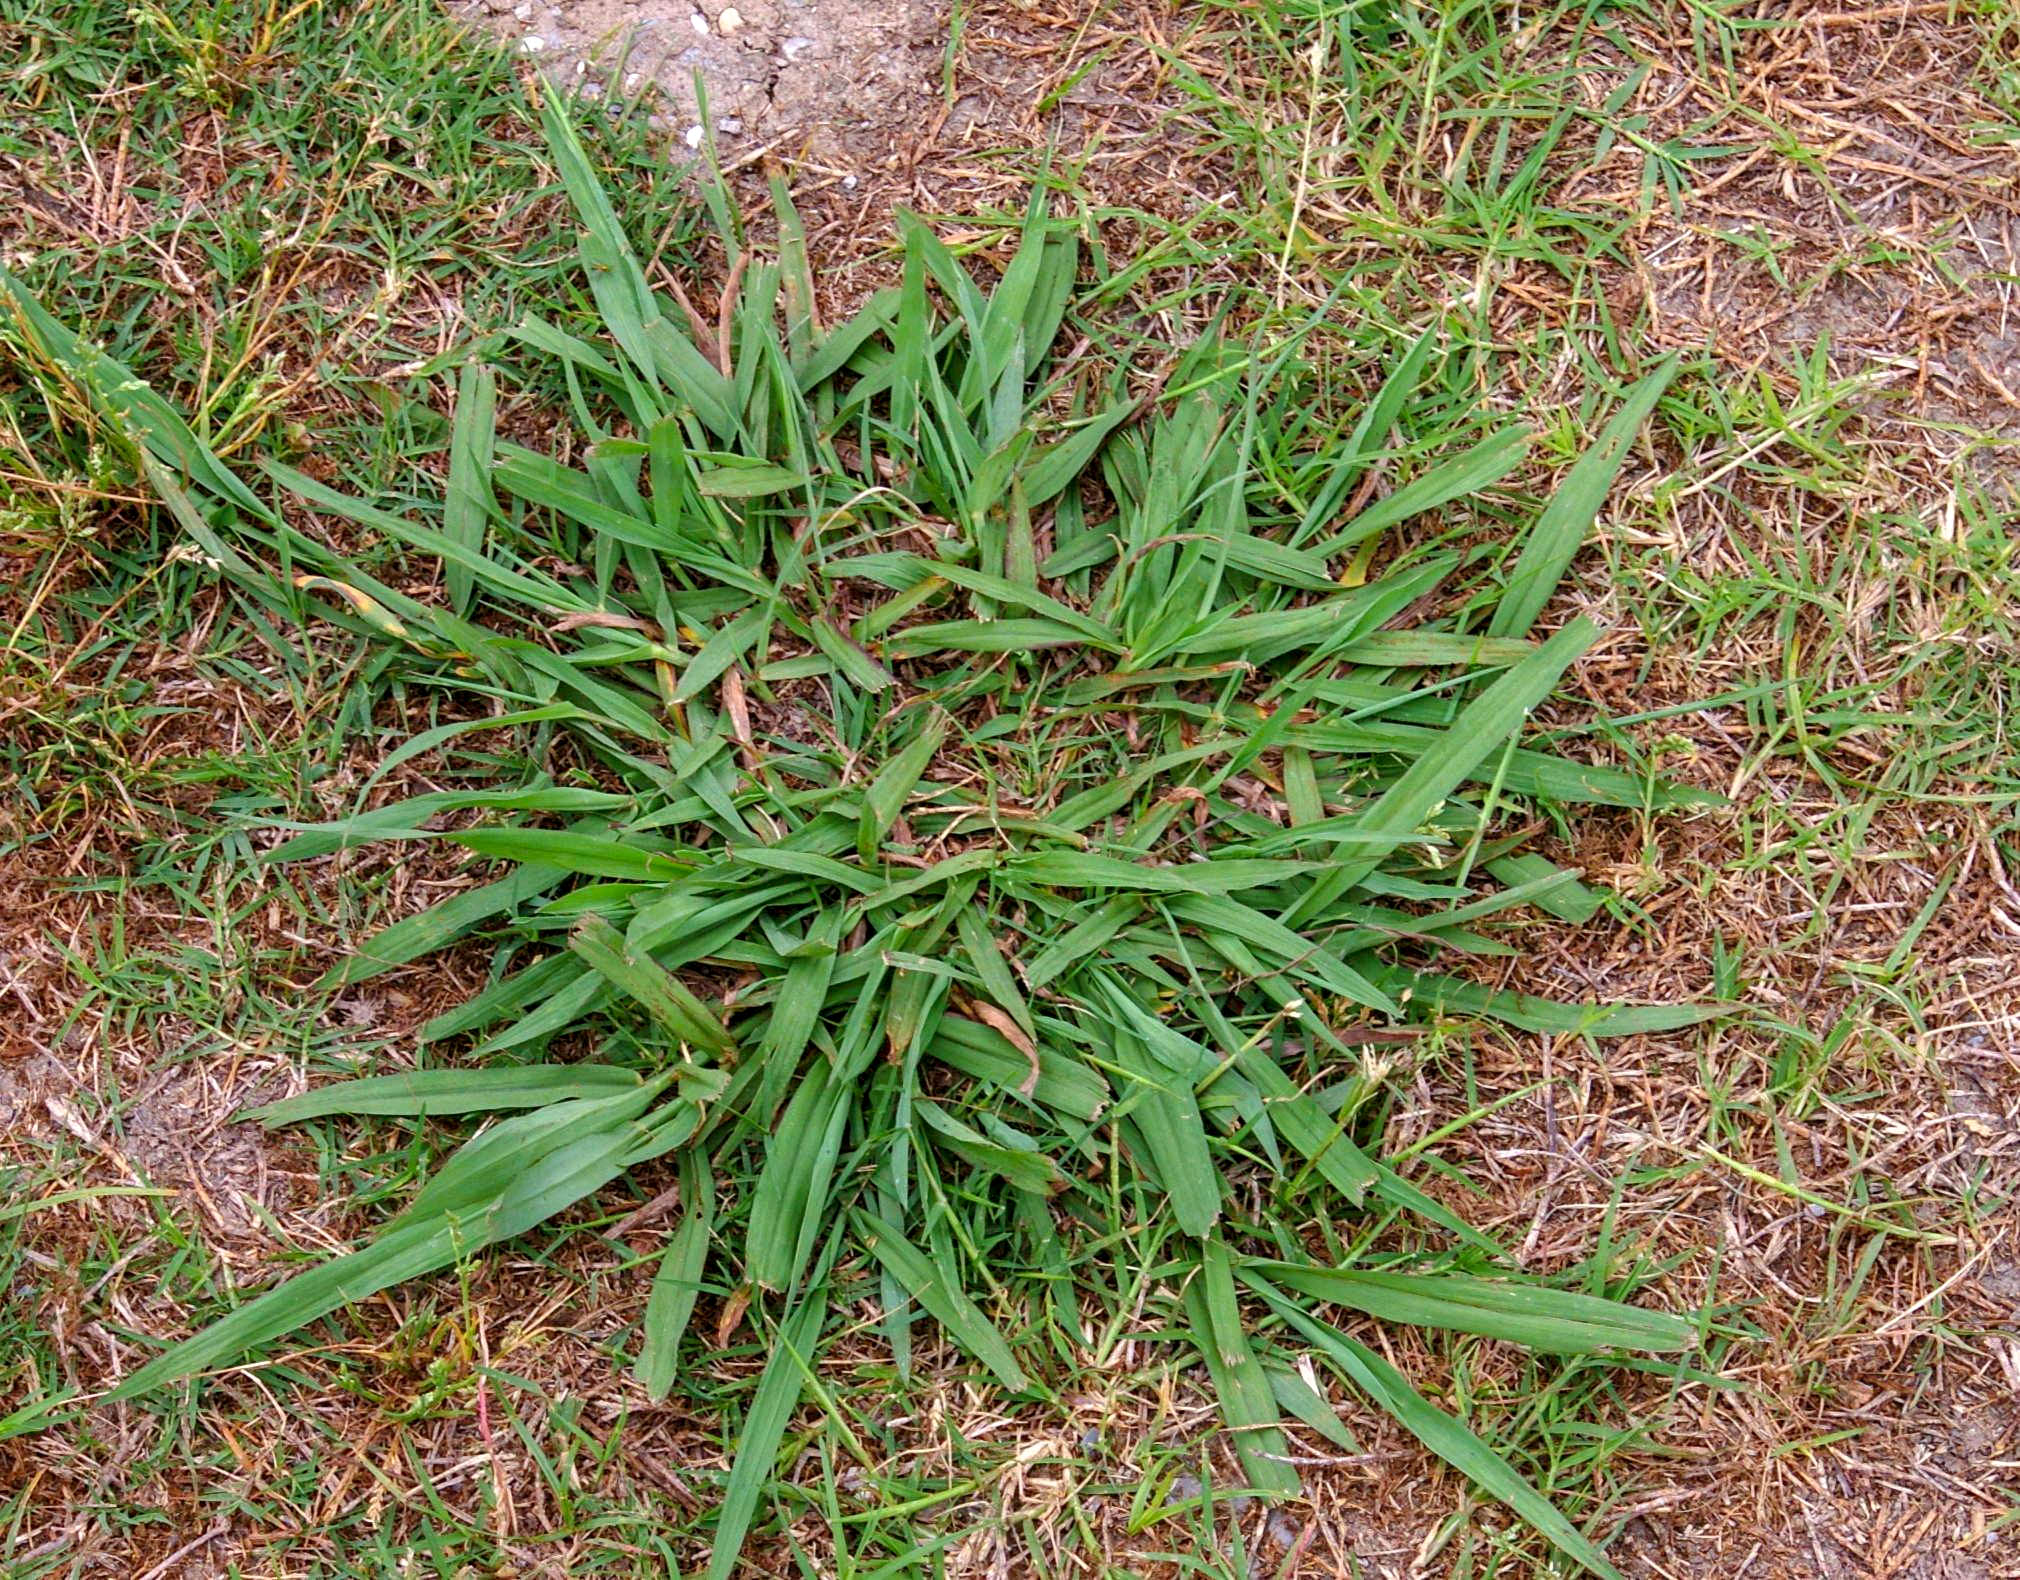 Different Types Of Weeds In Yard